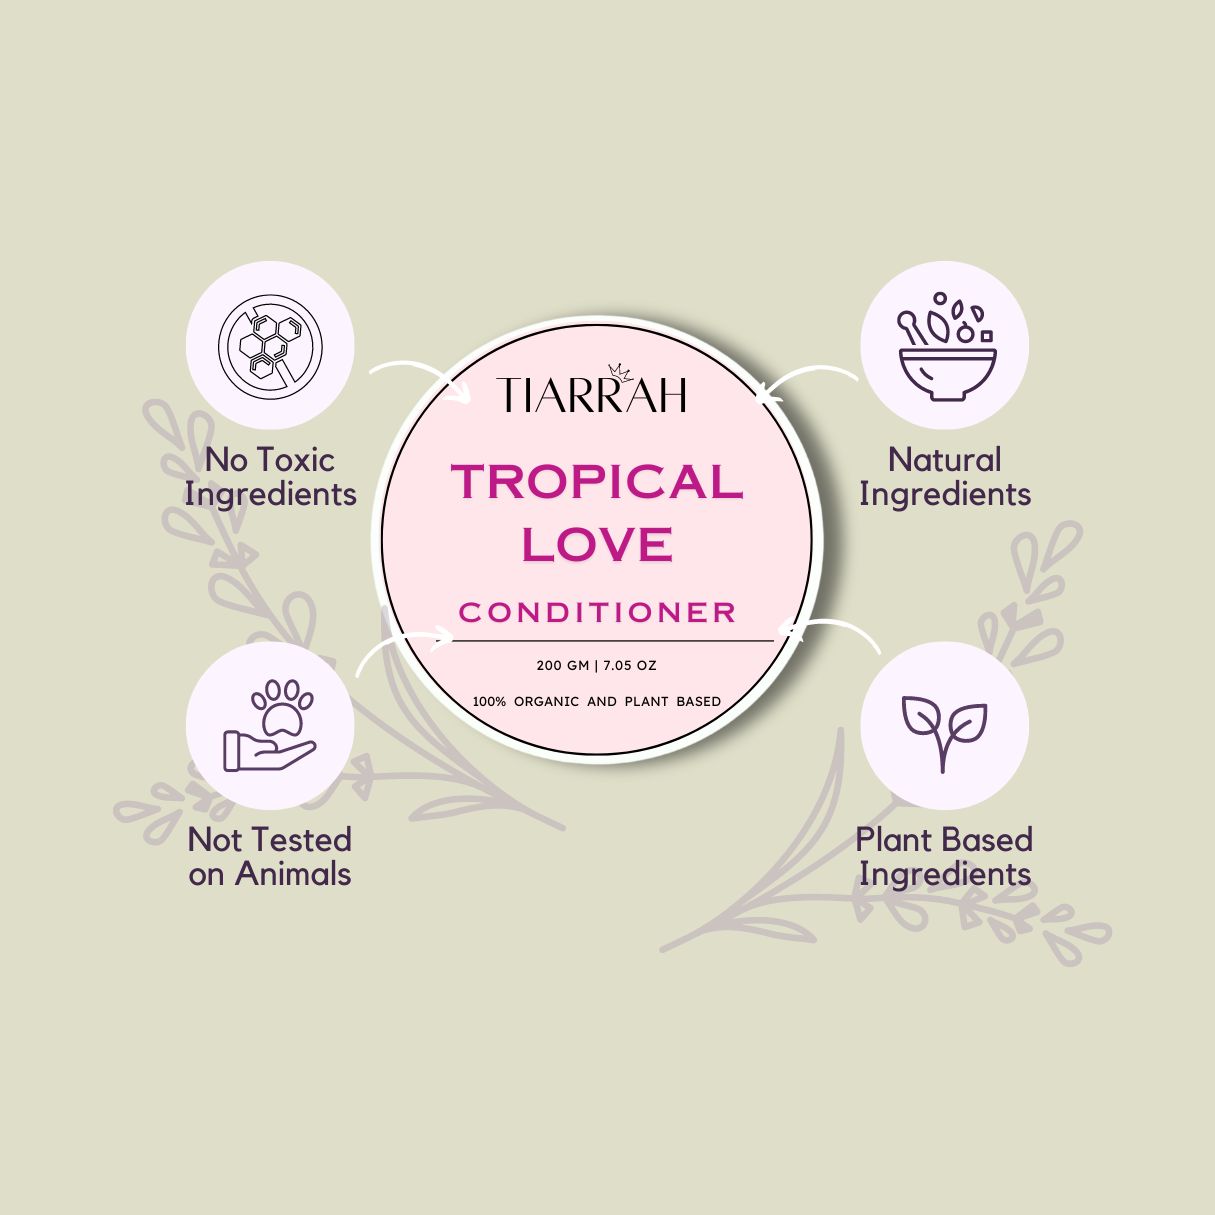 Tiarrah's Tropical Love Hair Conditioner: Pure, Safe, Nourishing - The Luxury Bath and Body Care Shop